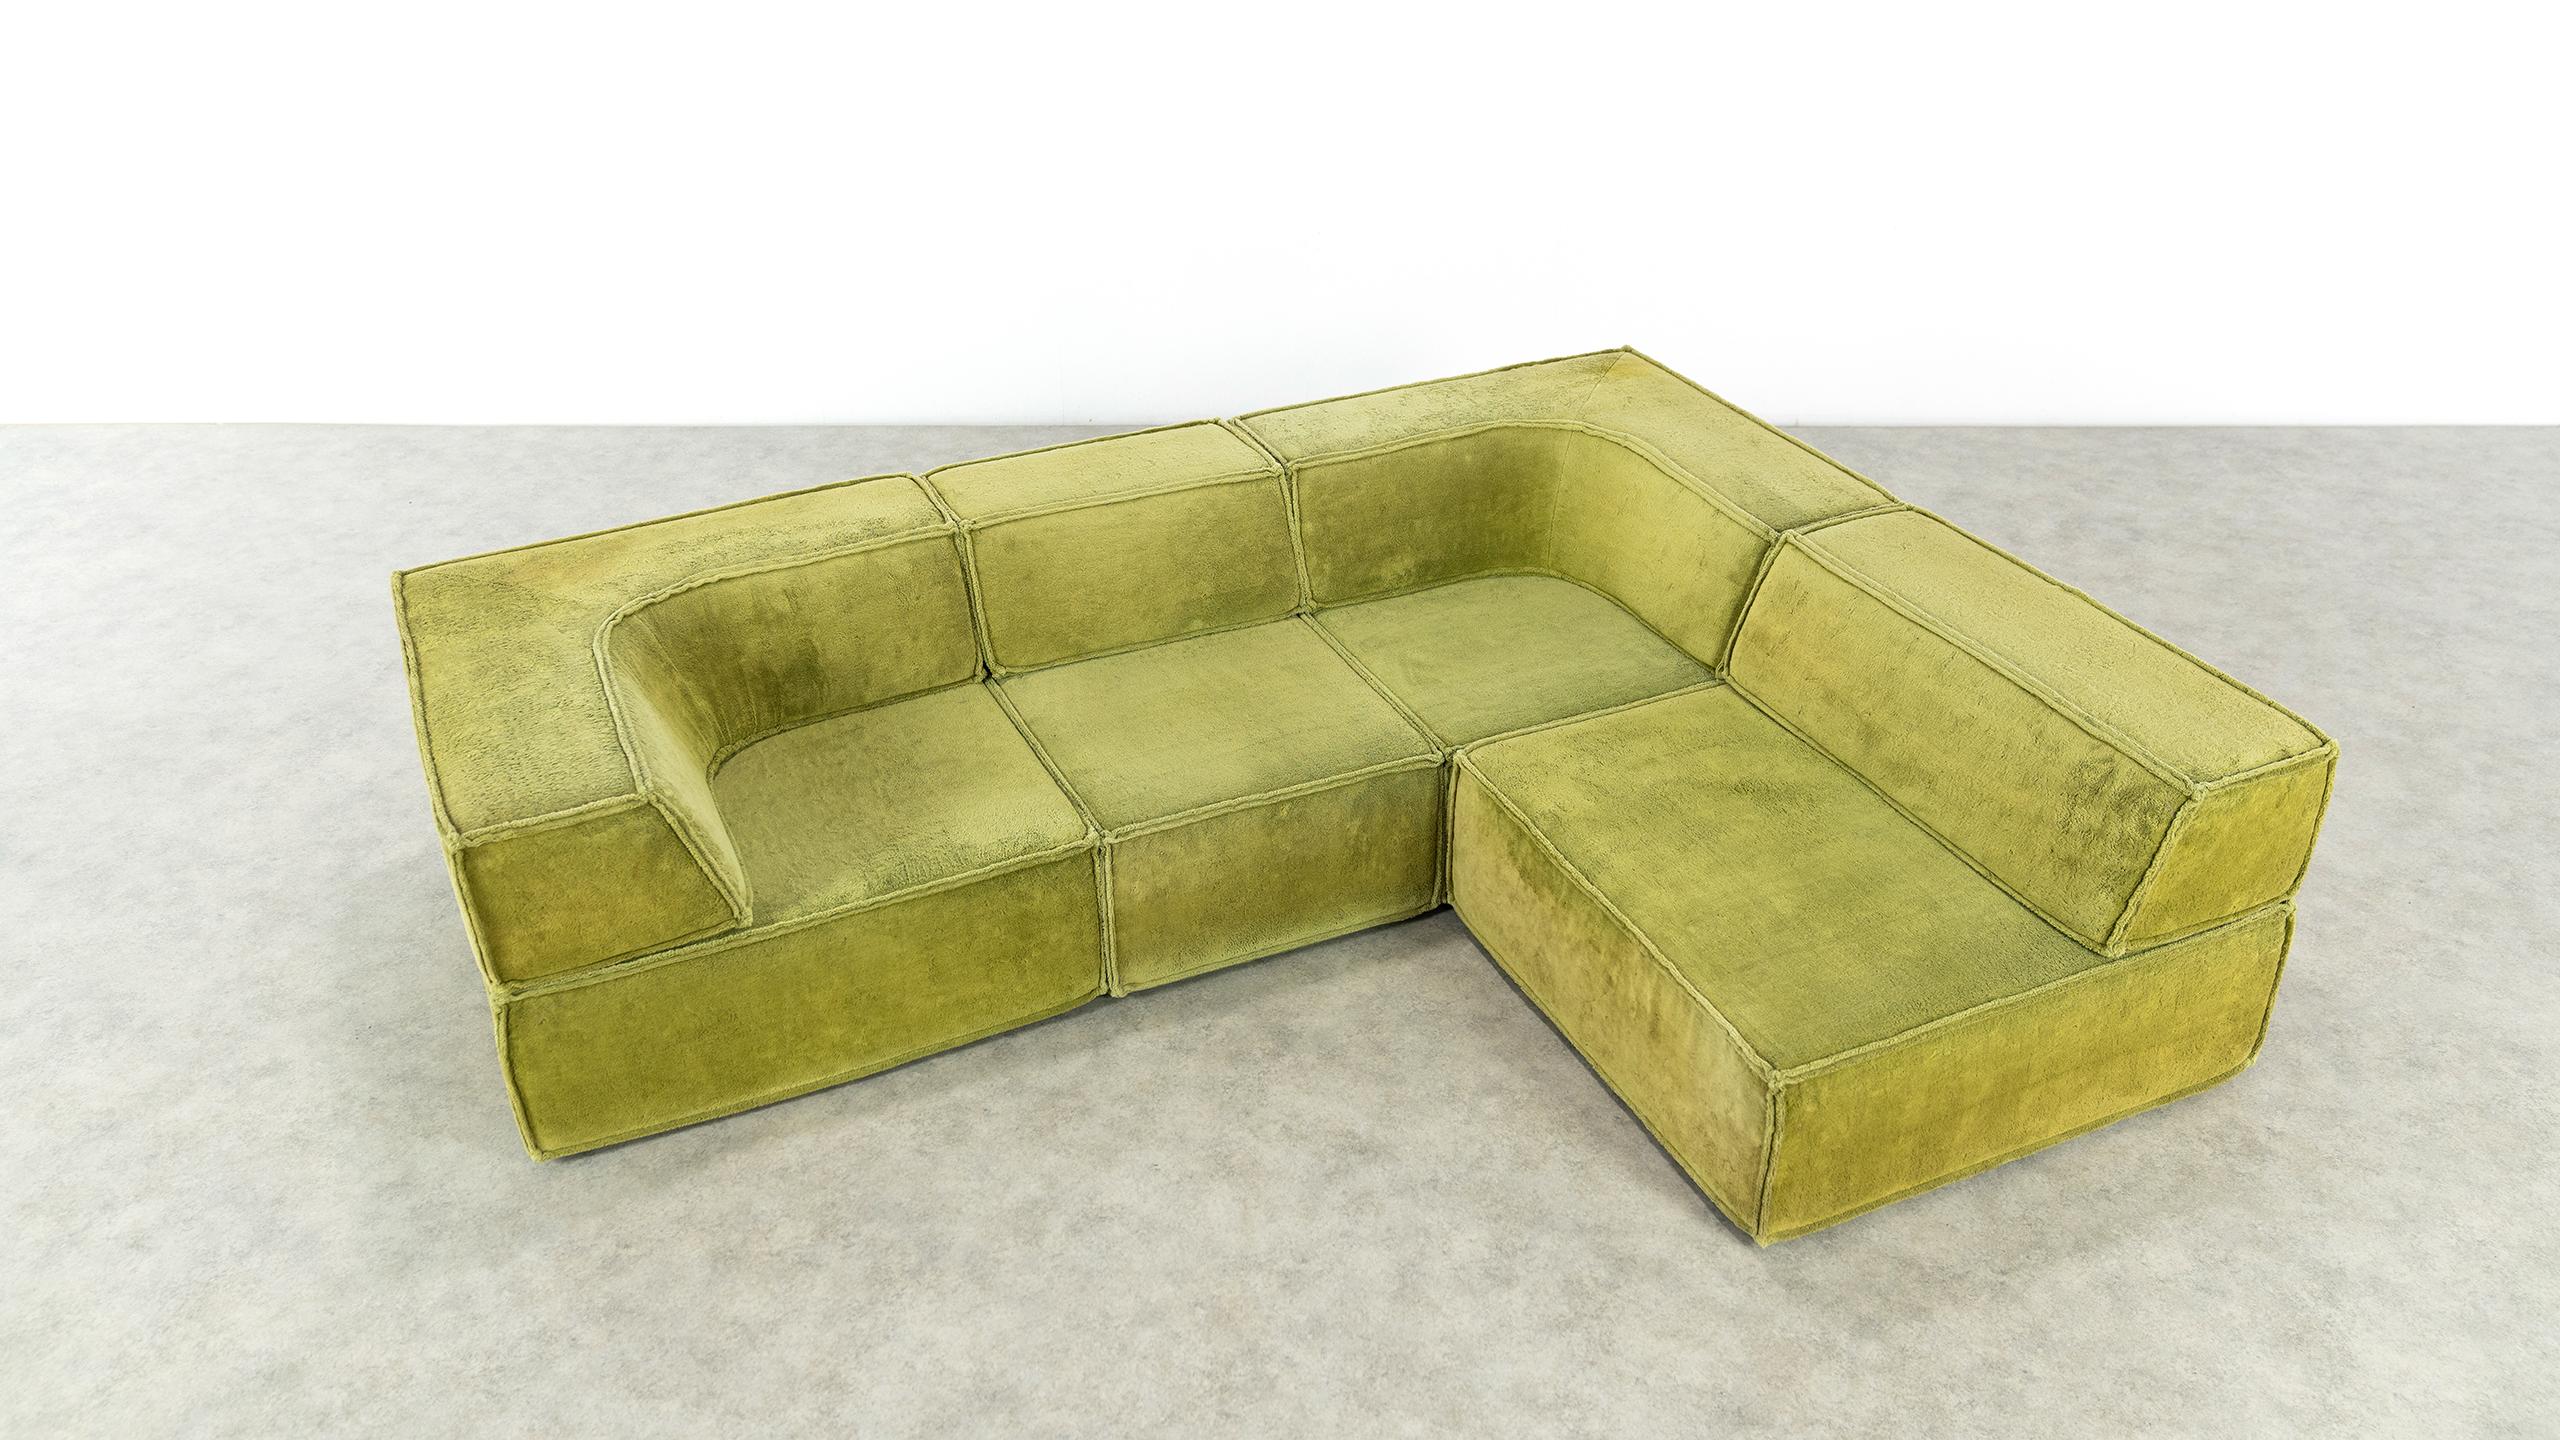 COR Trio Modular Sofa, Giant Landscape in Green, 1972 by Team Form Ag, Swiss 6